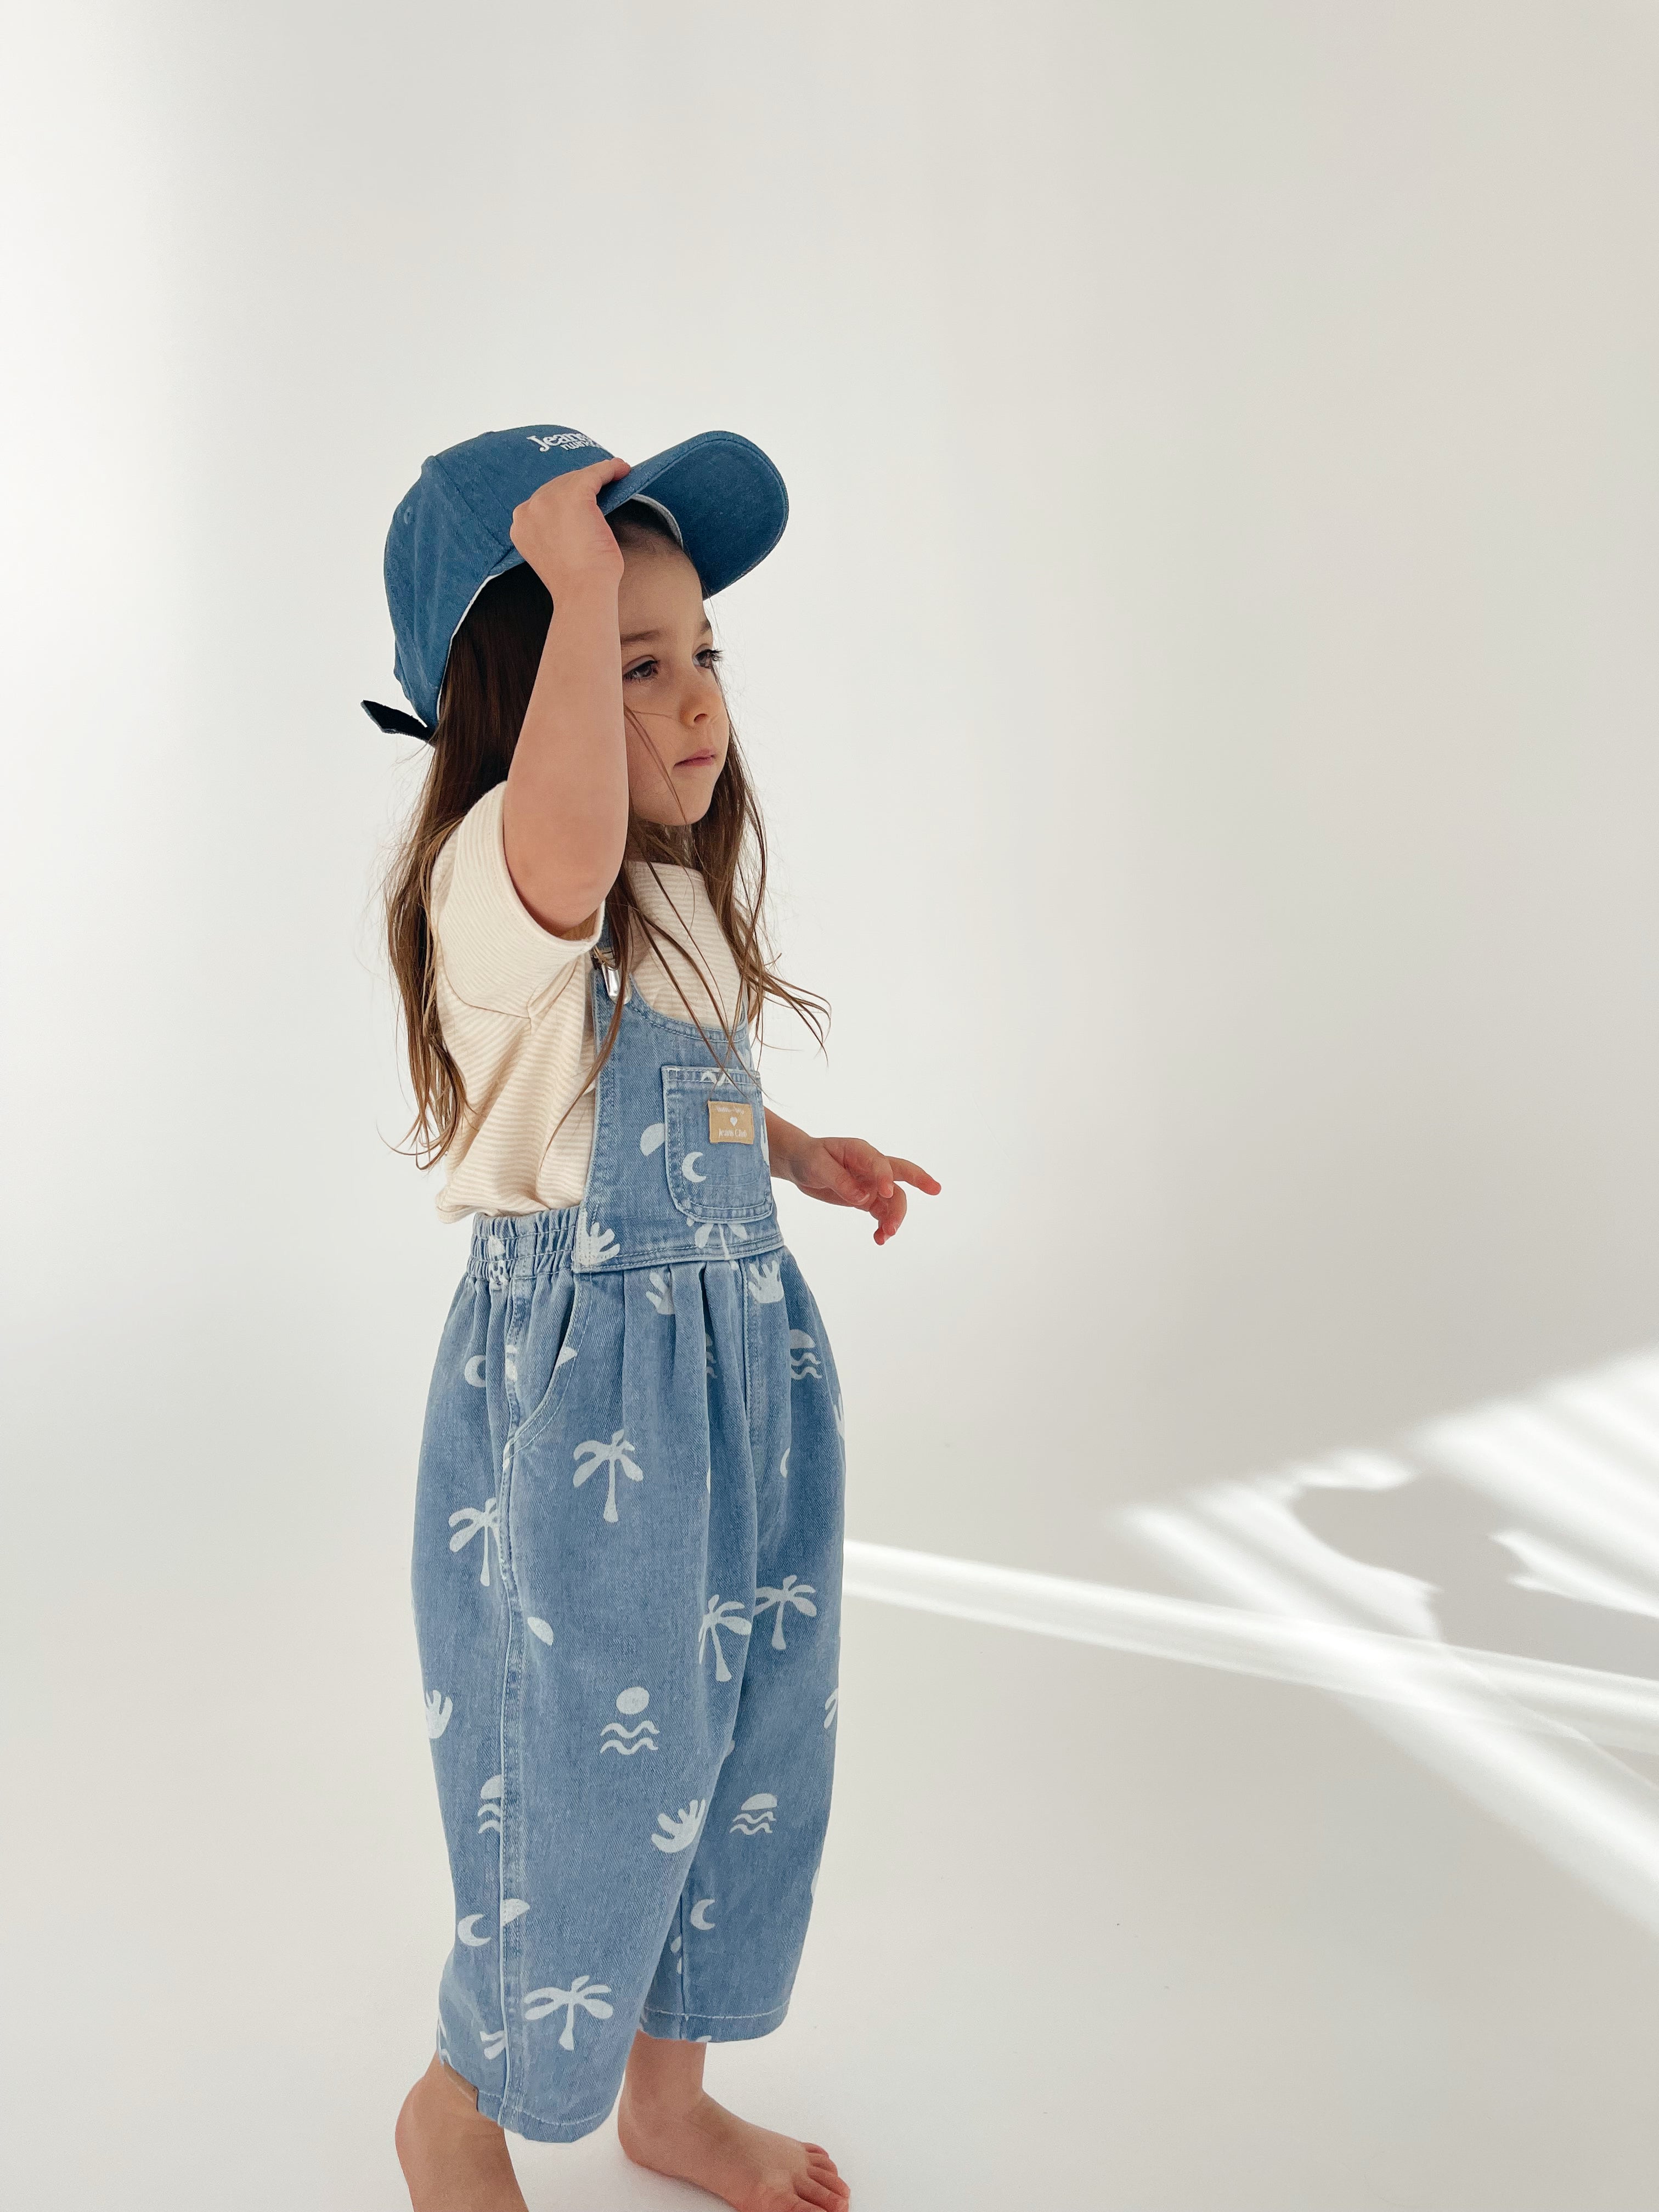 Bam Loves Boo Collab – Twin Collective Kids